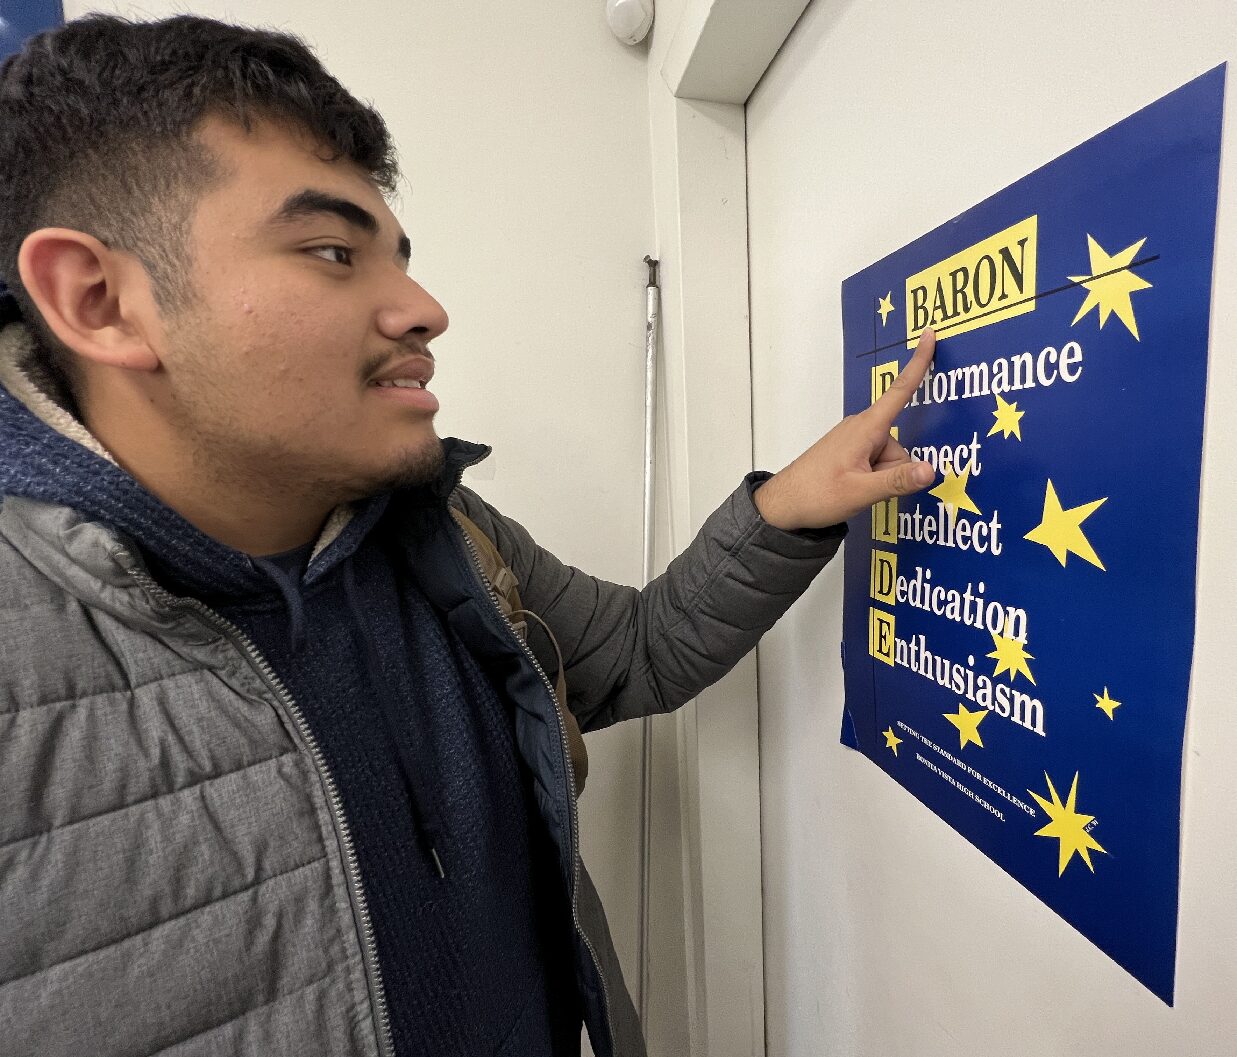 At Bonita Vista High (BVH)  throughout the classrooms there are BARON PRIDE posters around. On Jan. 30, BVH junior Miguel Rodriguez inspects the old Baron Way poster.